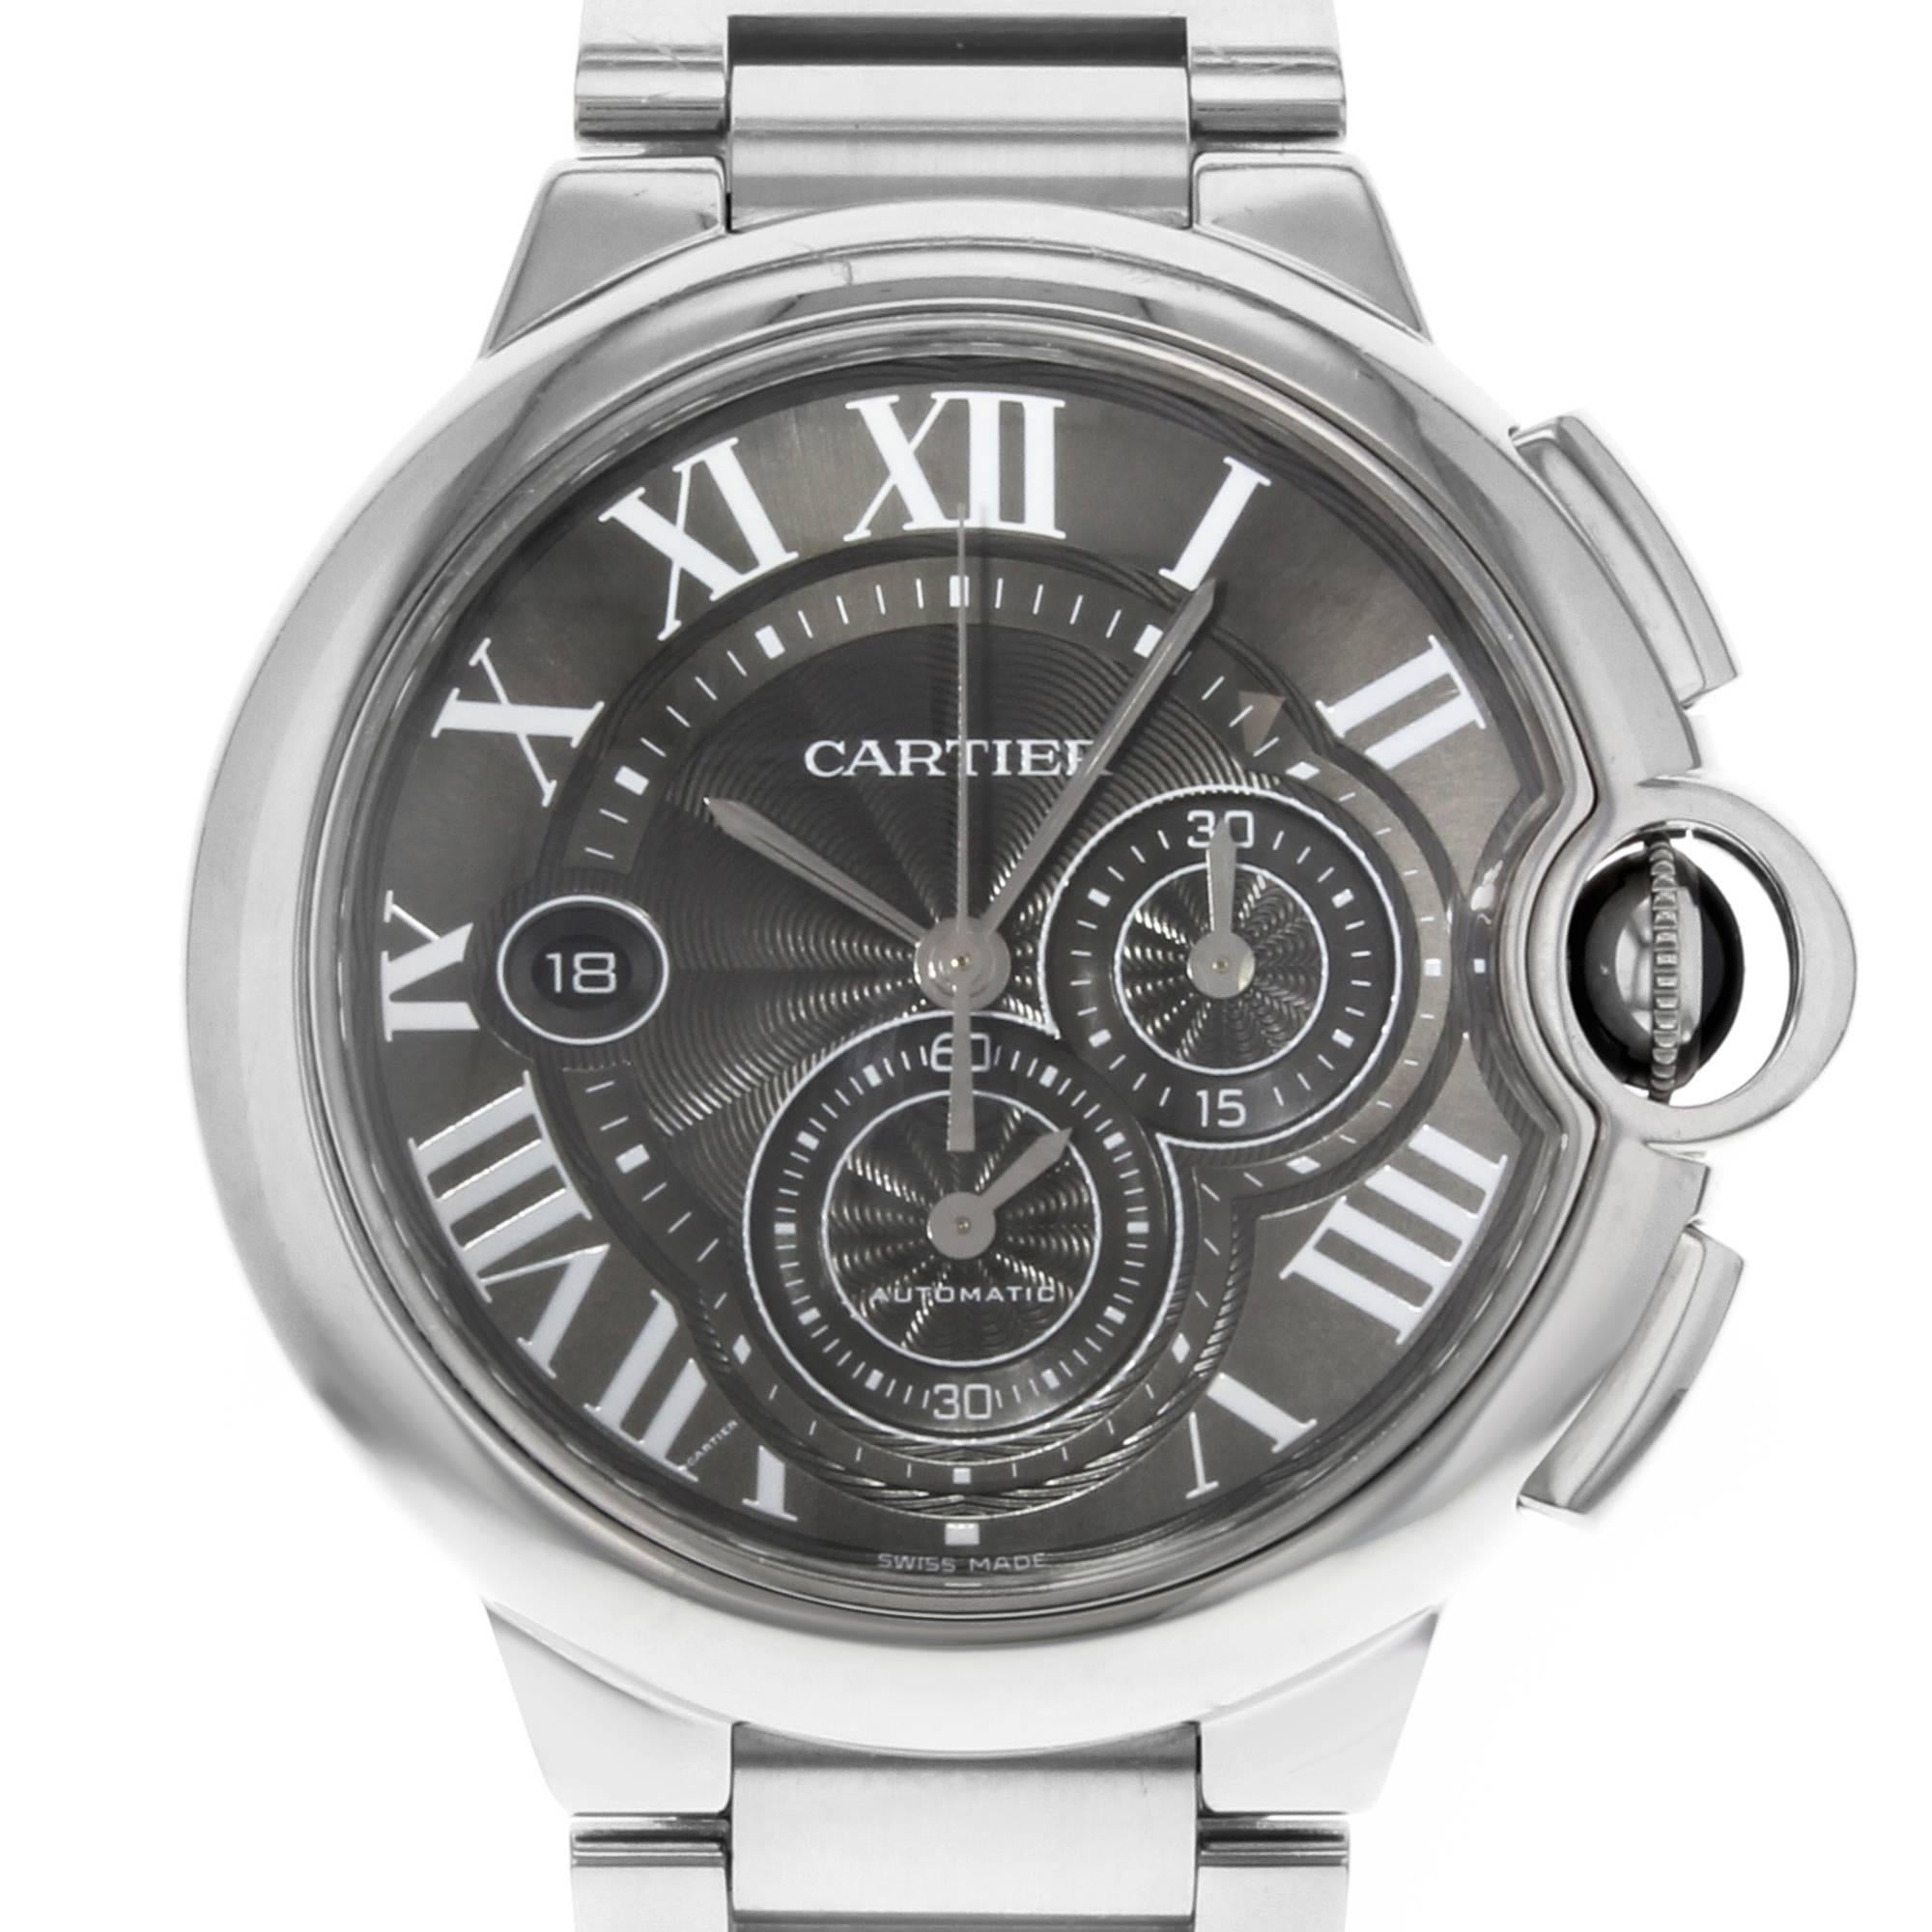 This pre-owned Cartier Ballon Bleu W6920025  is a beautiful men's timepiece that is powered by an automatic movement which is cased in a stainless steel case. It has a round shape face, chronograph, date, small seconds subdial dial and has hand